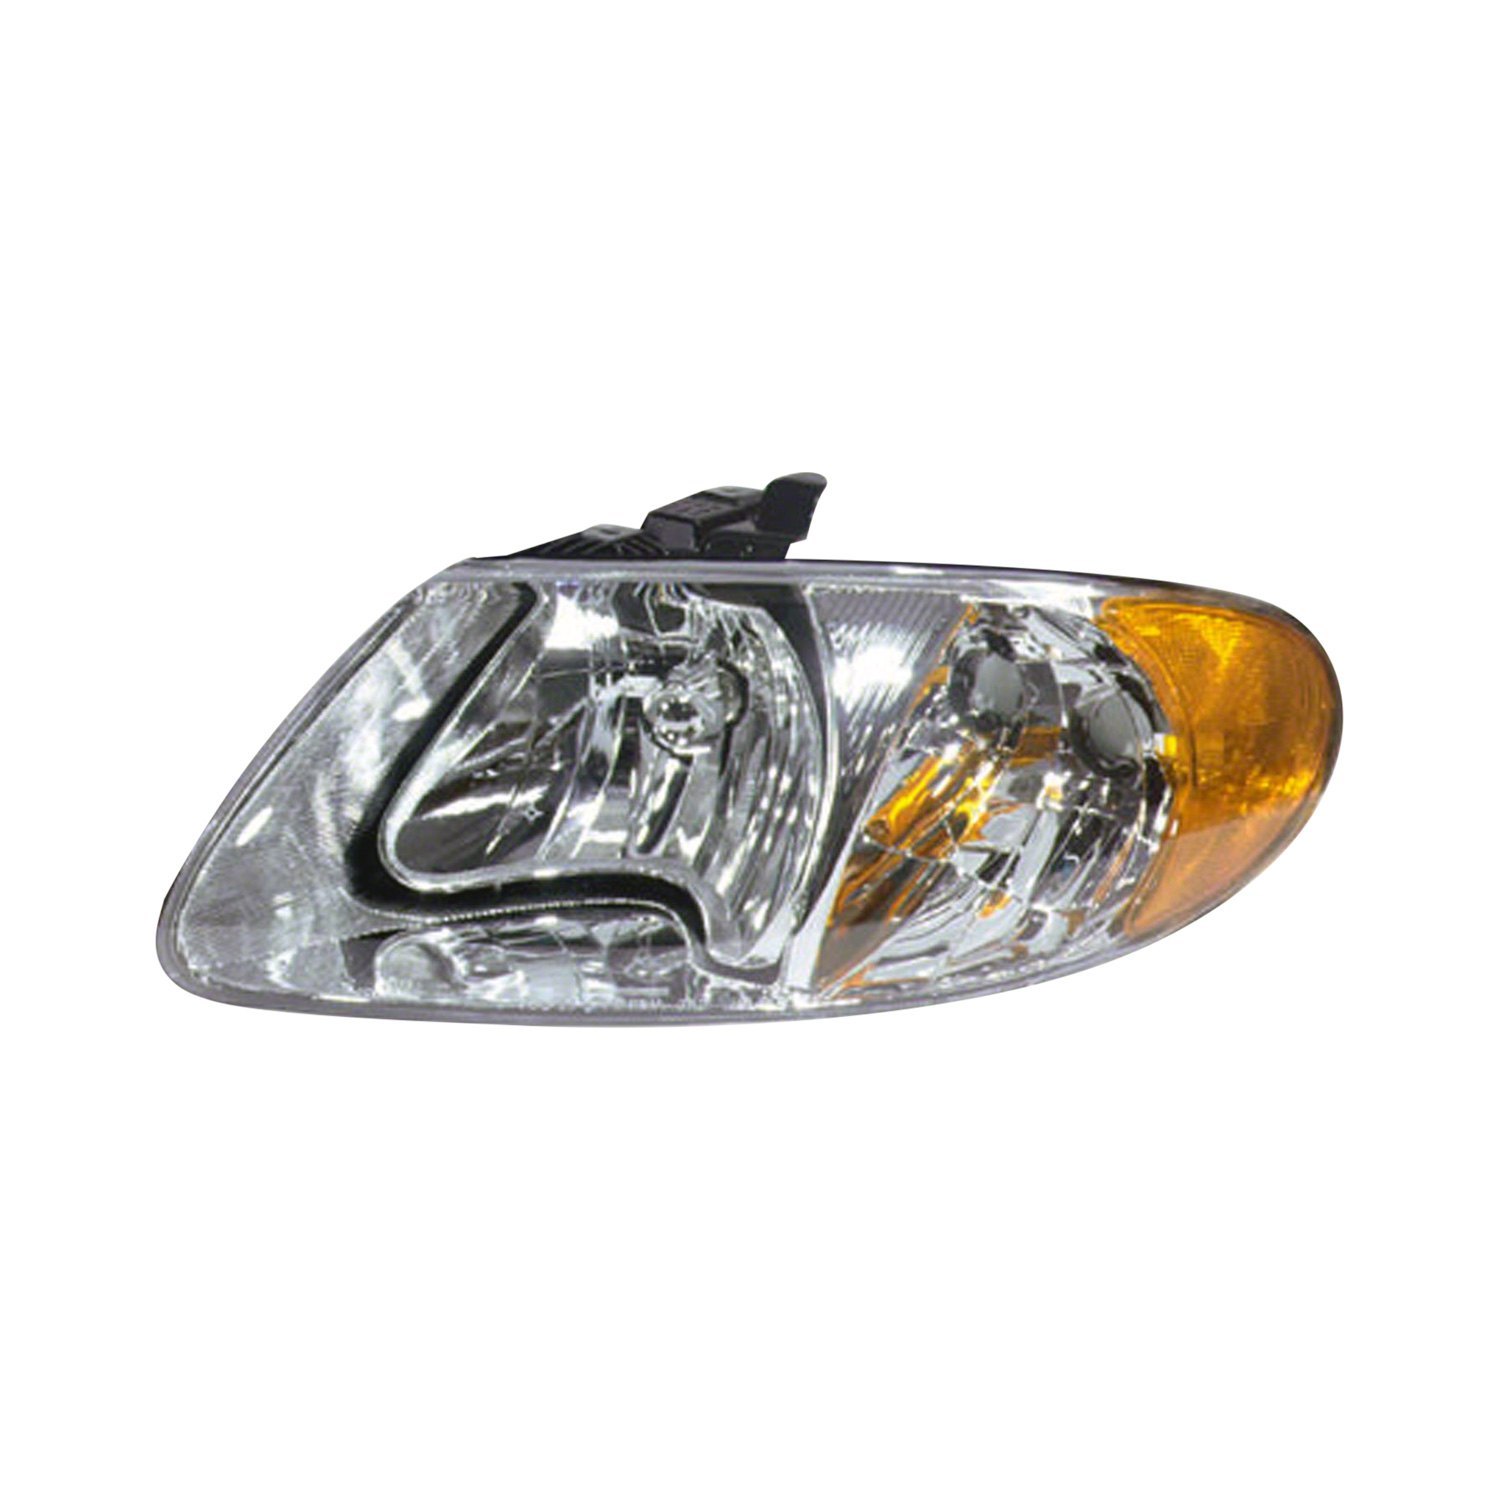 chrysler town and country 2007 headlight bulb